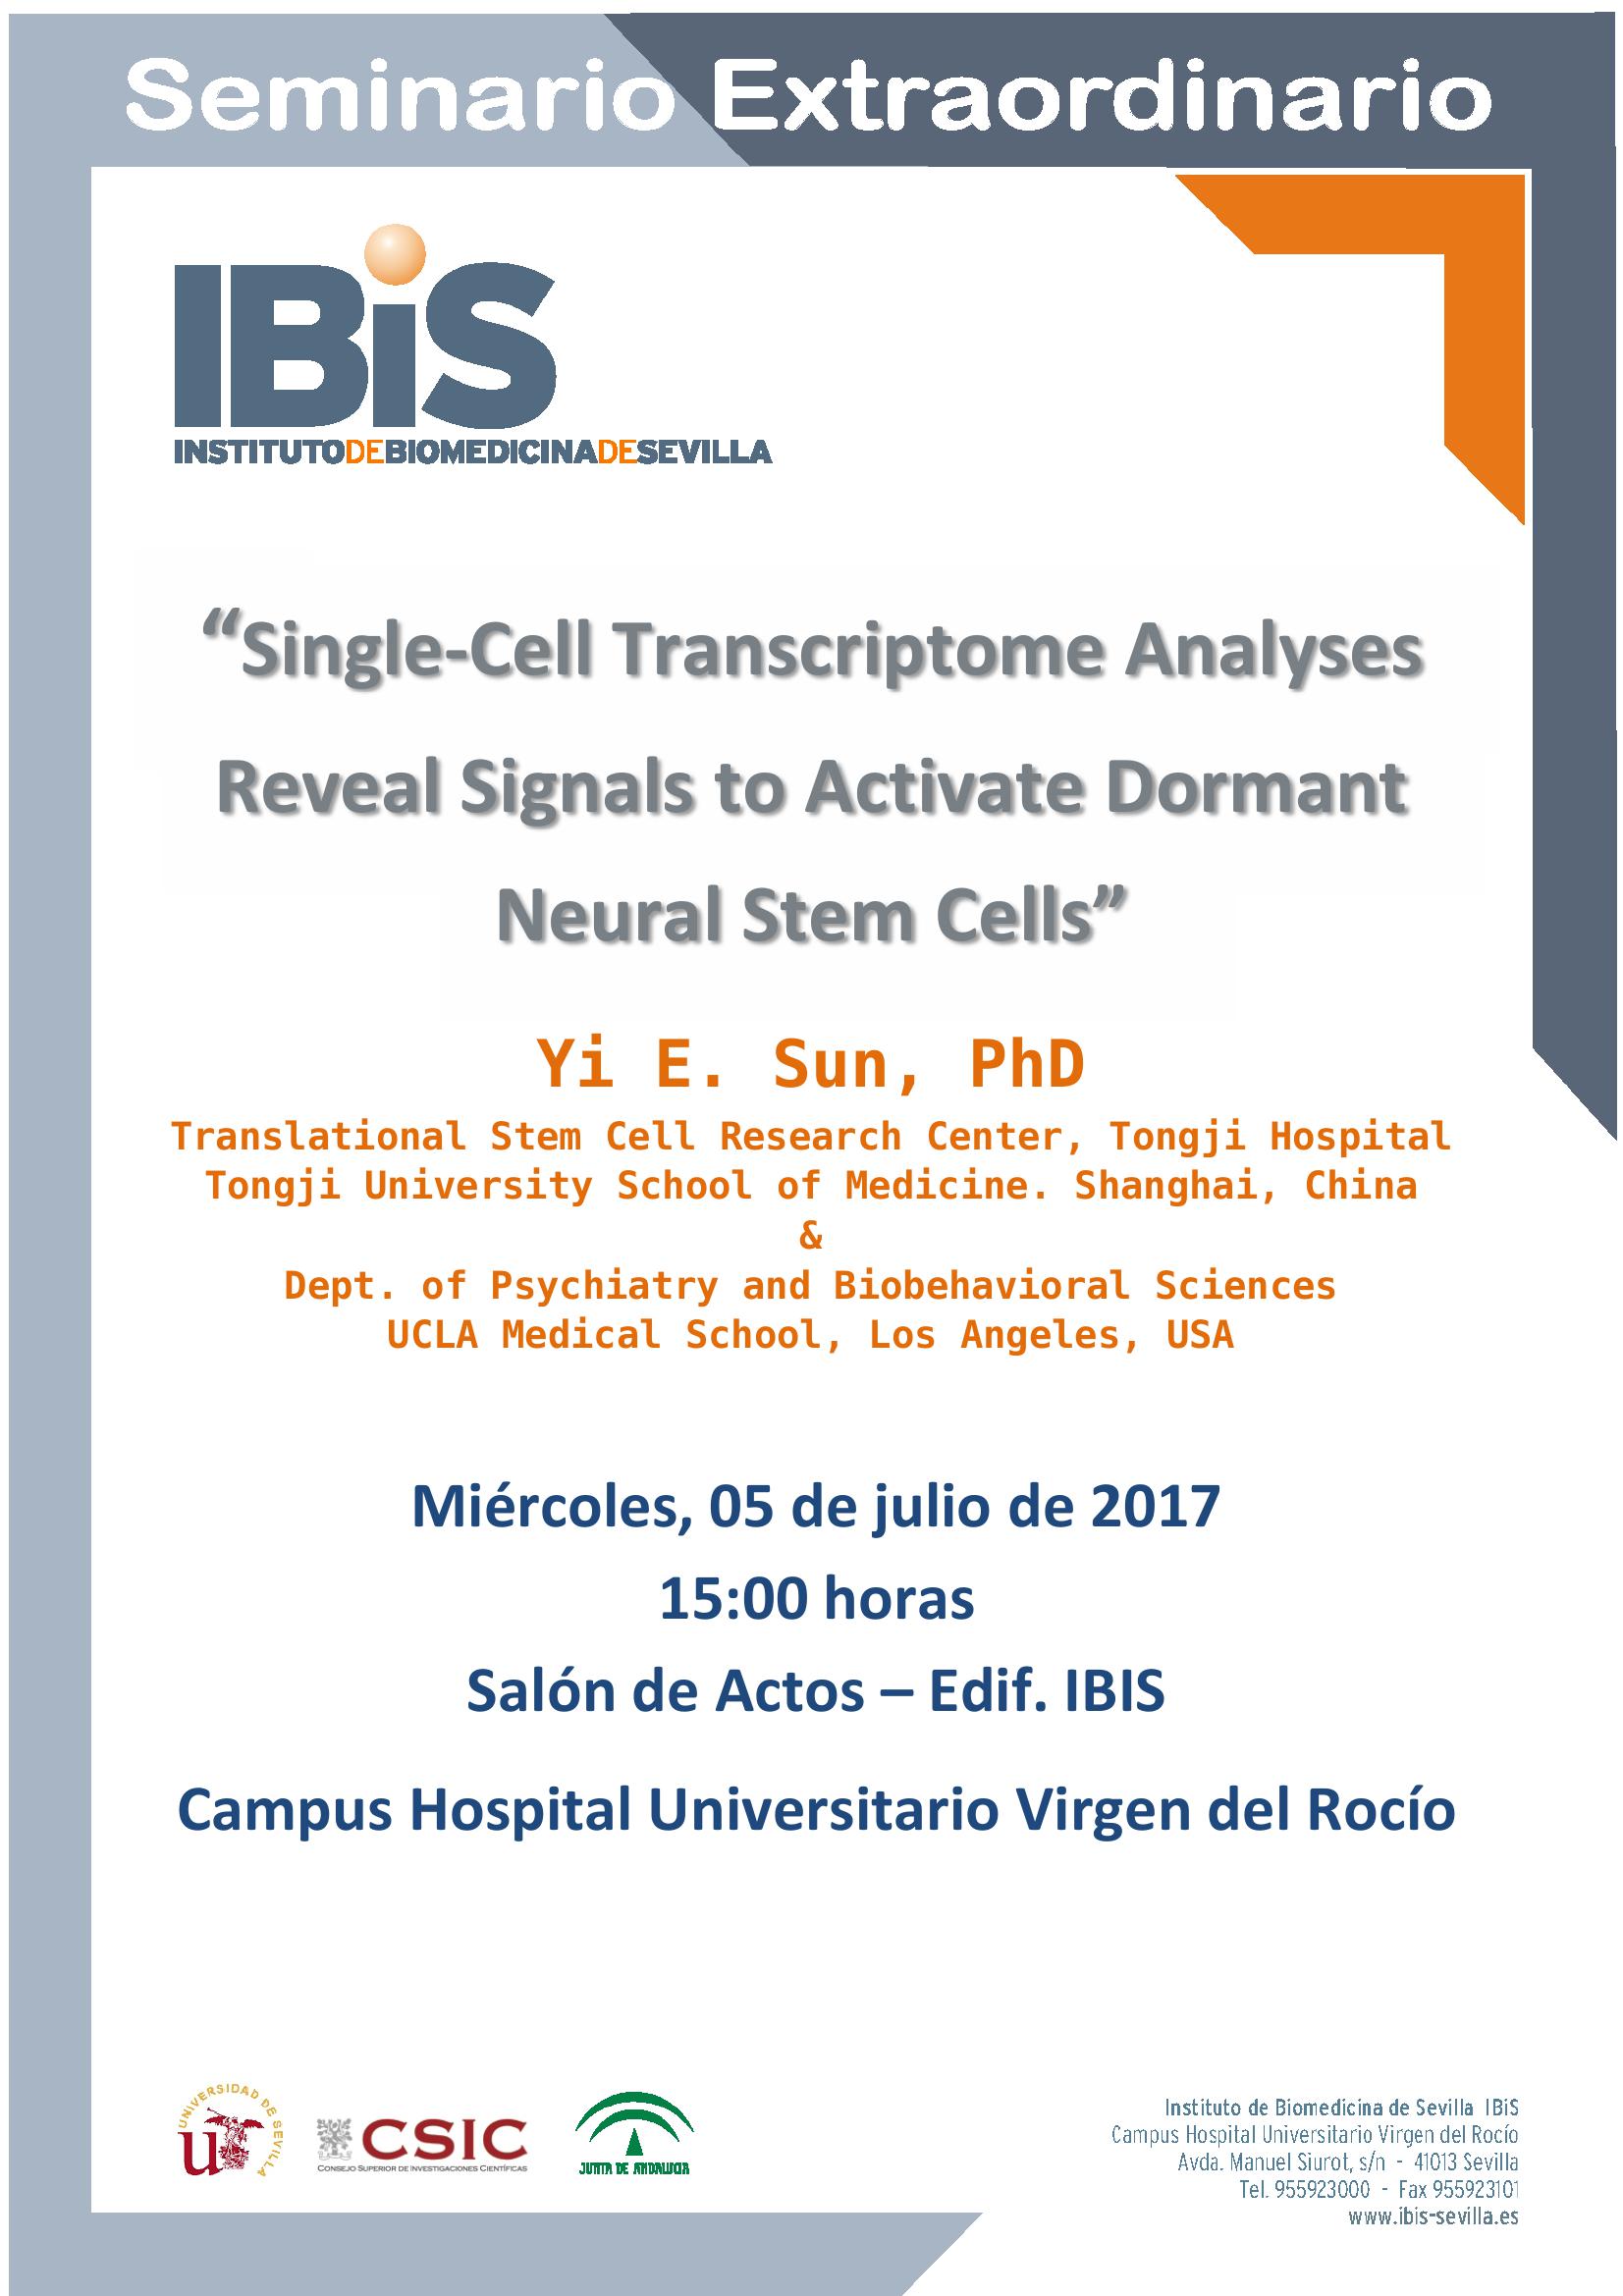 Poster: Single-Cell Transcriptome Analyses Reveal Signals to Activate Dormant Neural Stem Cells